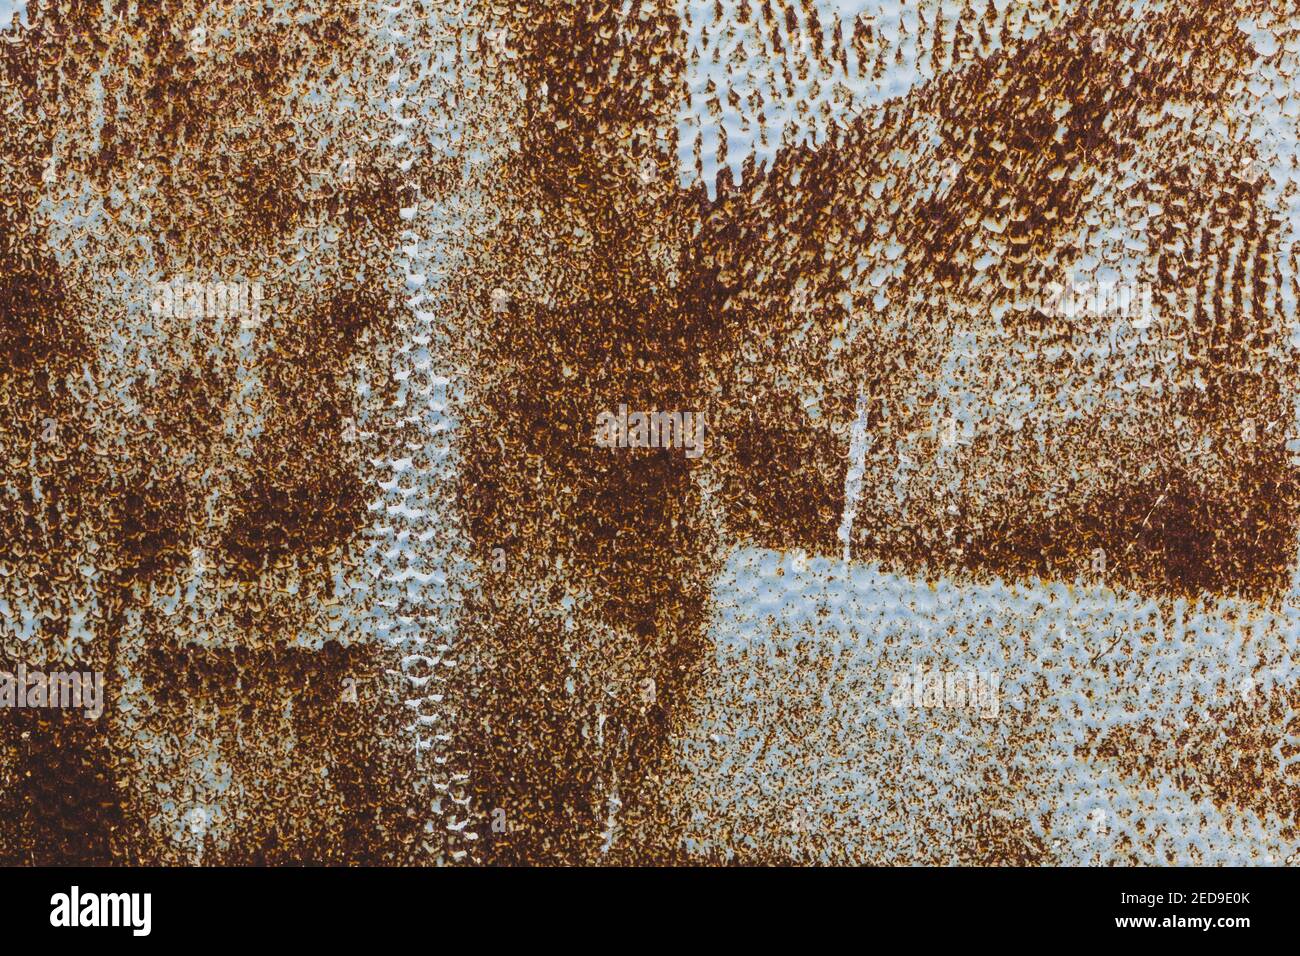 Surfaces formed with rusted metal, background Stock Photo